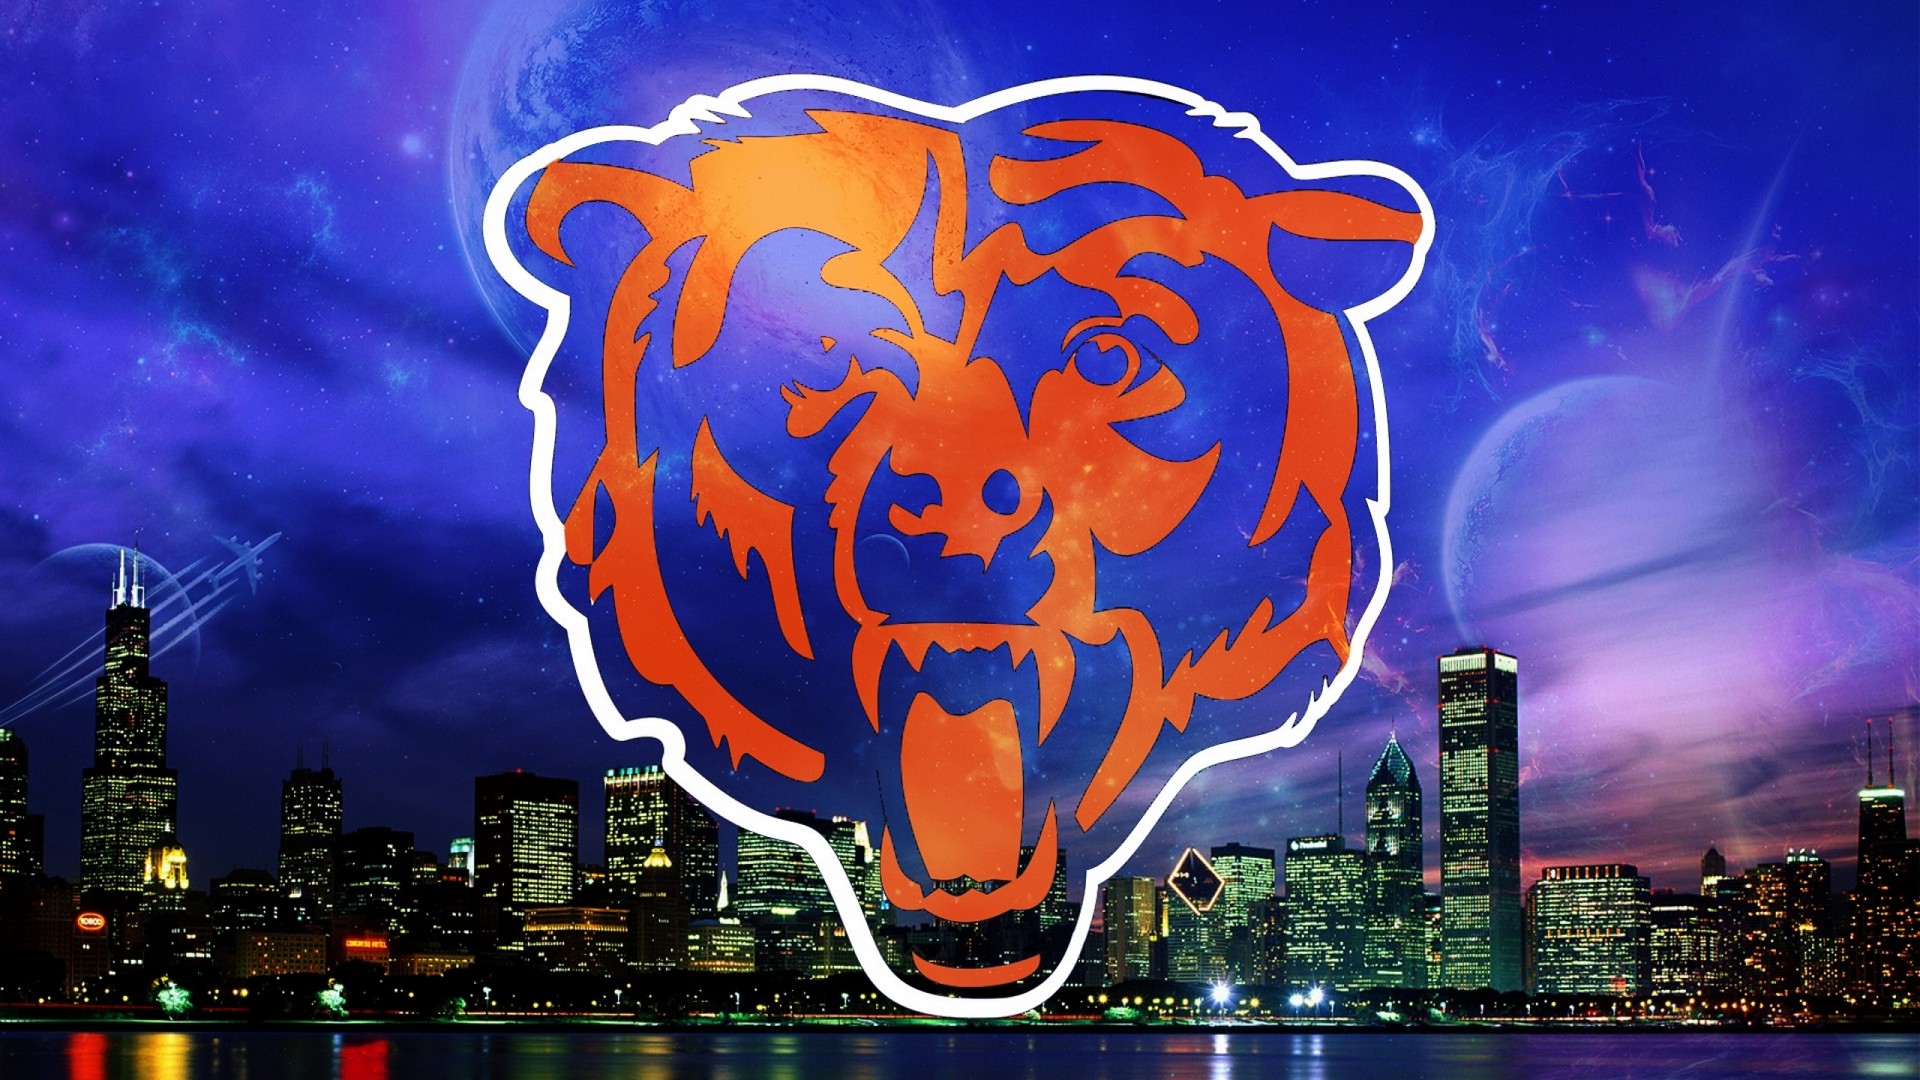 HD Chicago Bears NFL Wallpapers with high-resolution 1920x1080 pixel. You can use this wallpaper for your Mac or Windows Desktop Background, iPhone, Android or Tablet and another Smartphone device